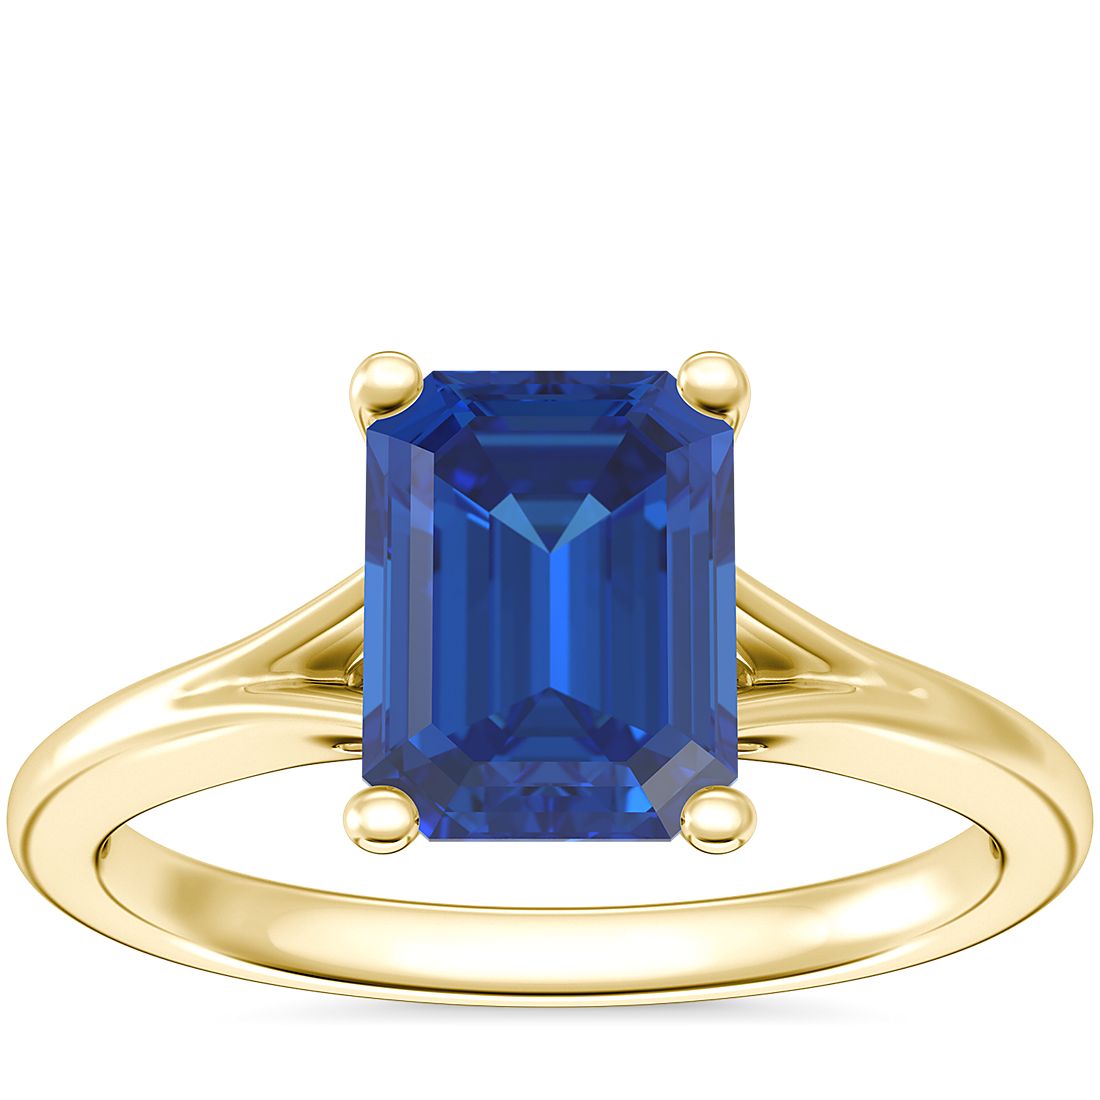 Petite Split Shank Solitaire Engagement Ring with Emerald-Cut Sapphire in 18k Yellow Gold (8x6mm)